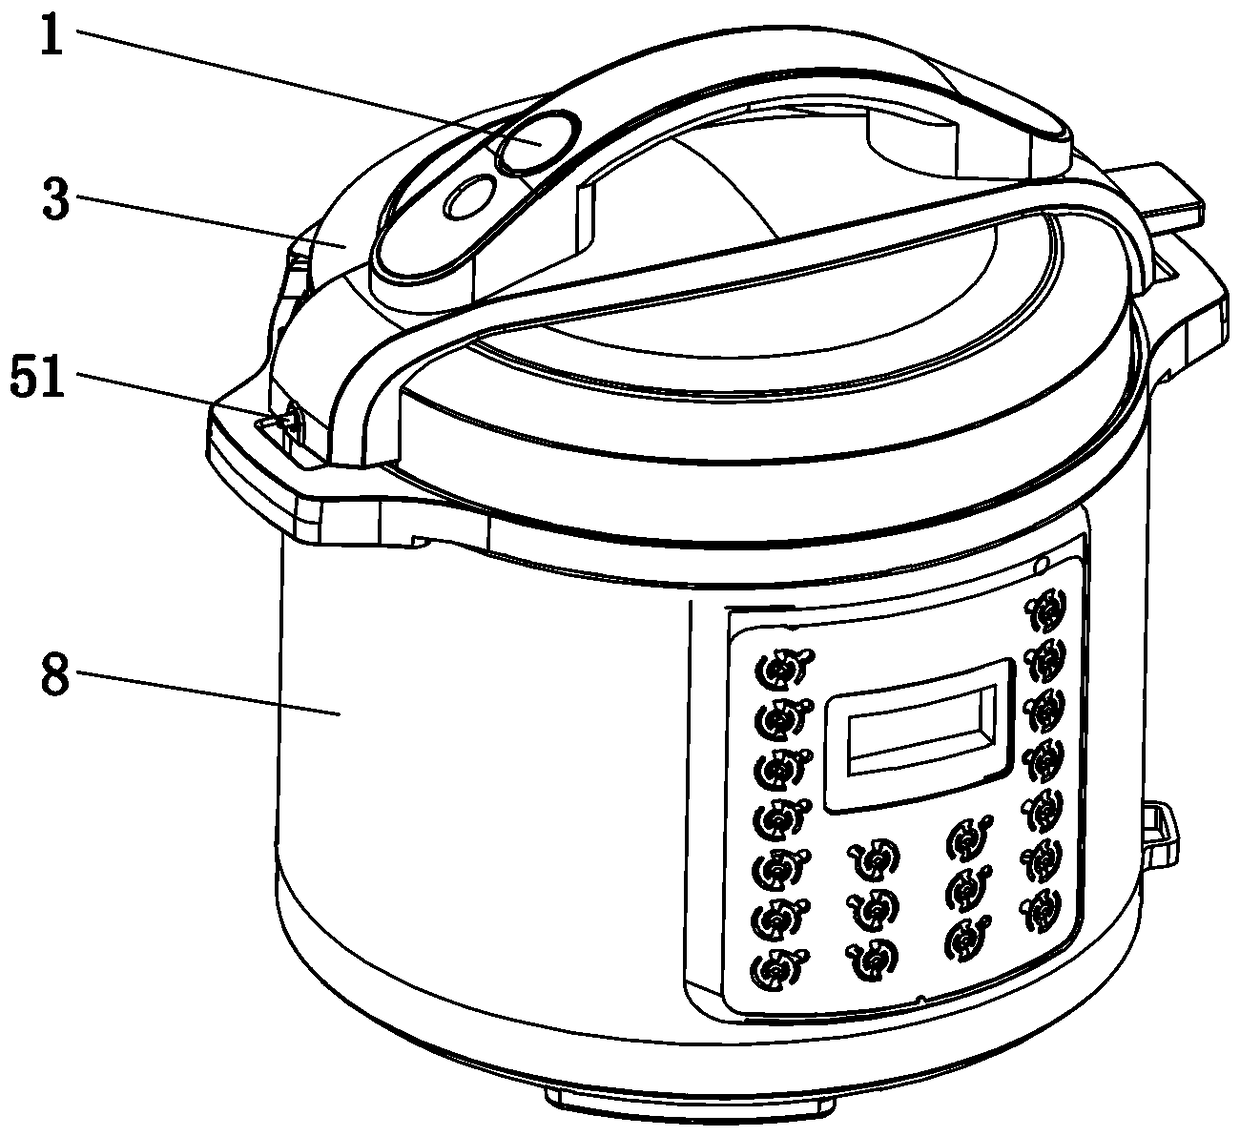 Lock lid structure of pressure cooker